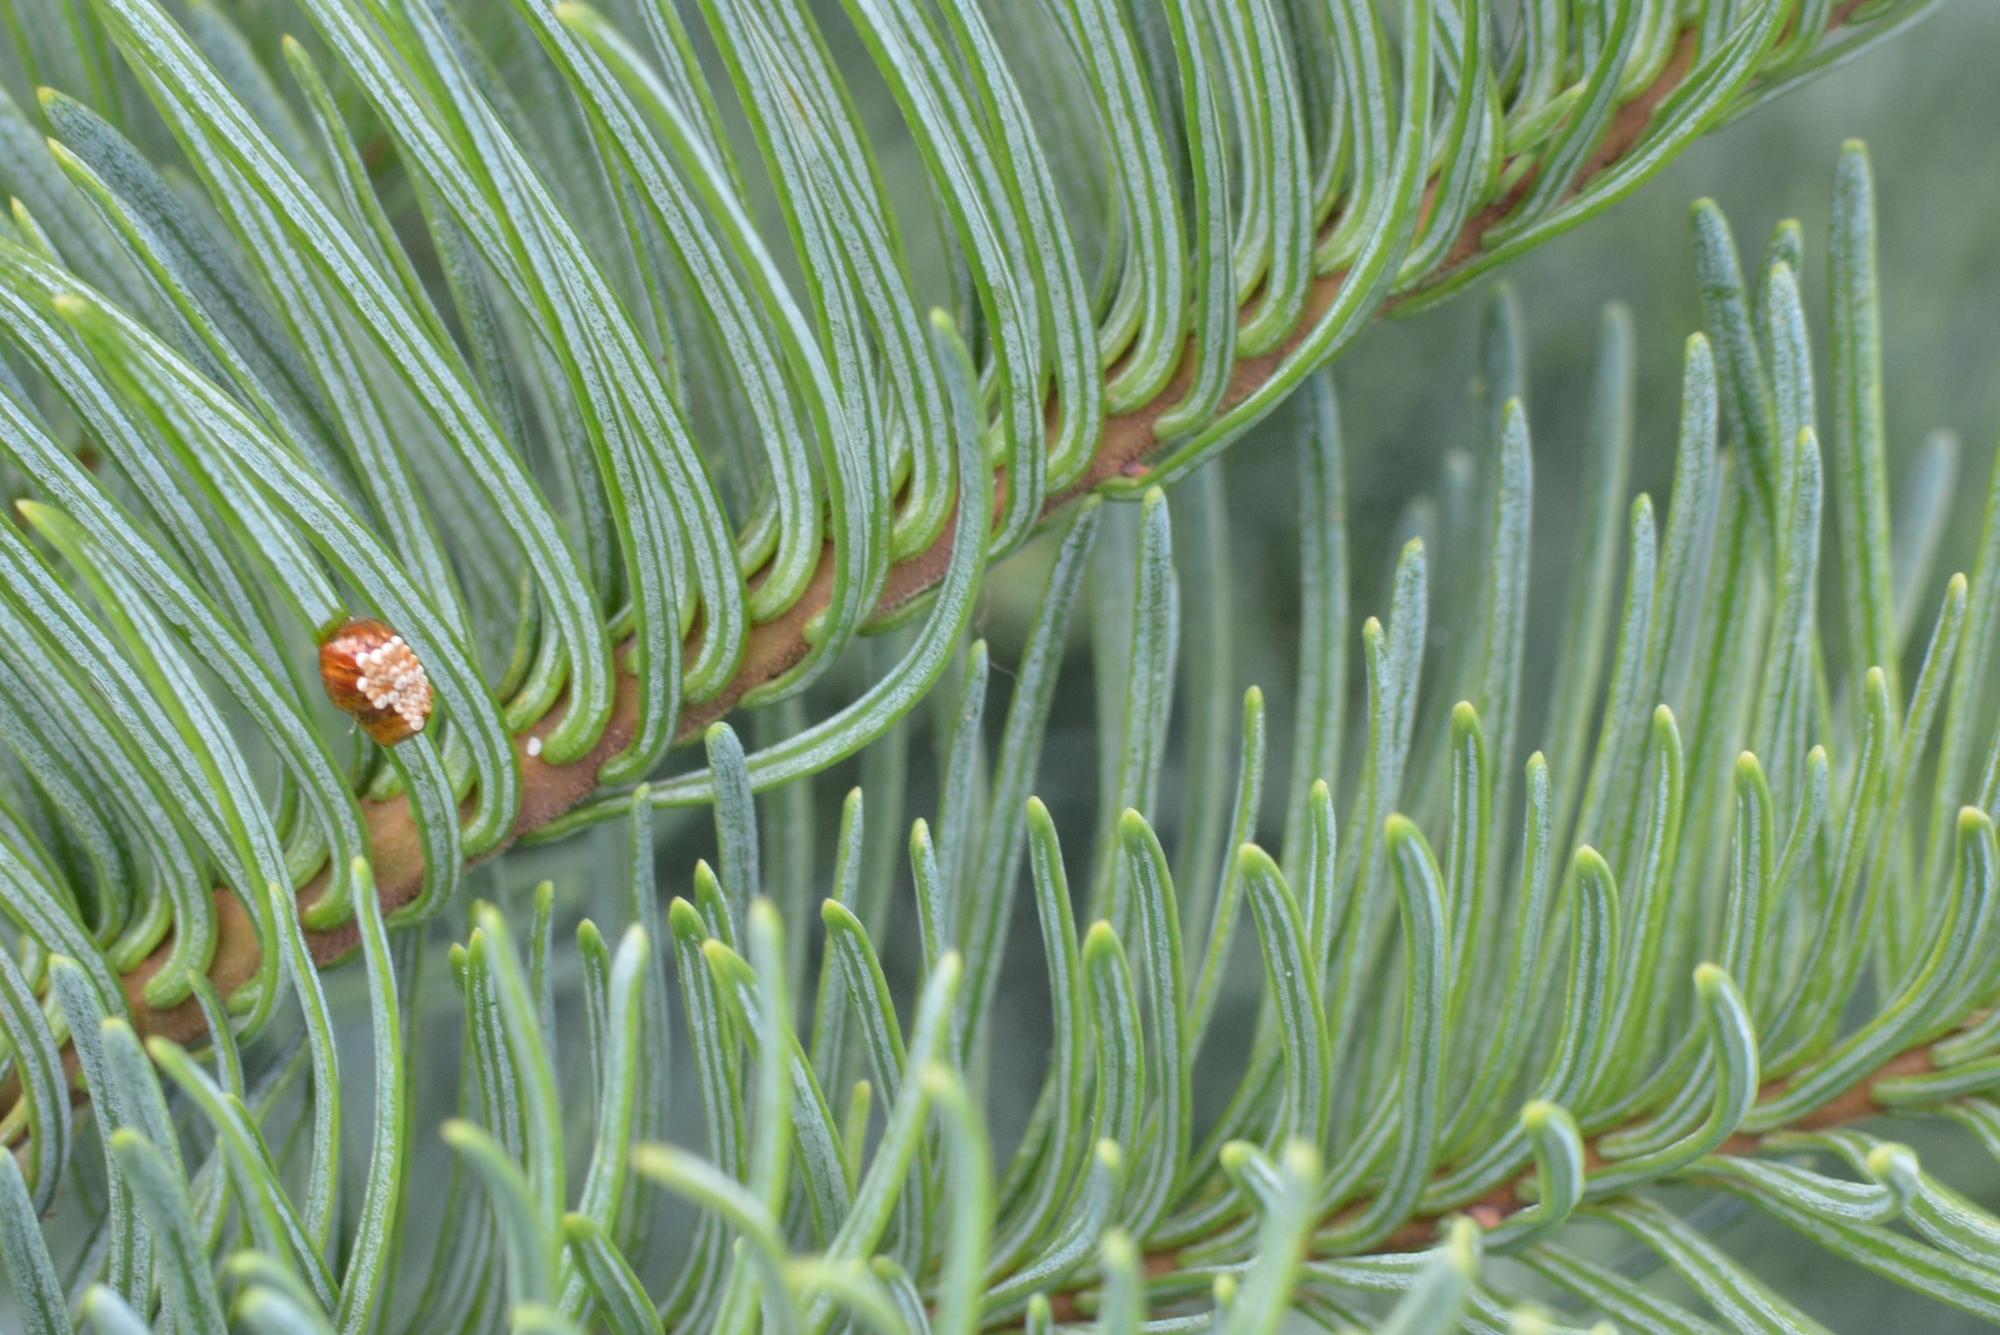 A close-up view of lady beetle eggs on a needle of a Christmas tree.